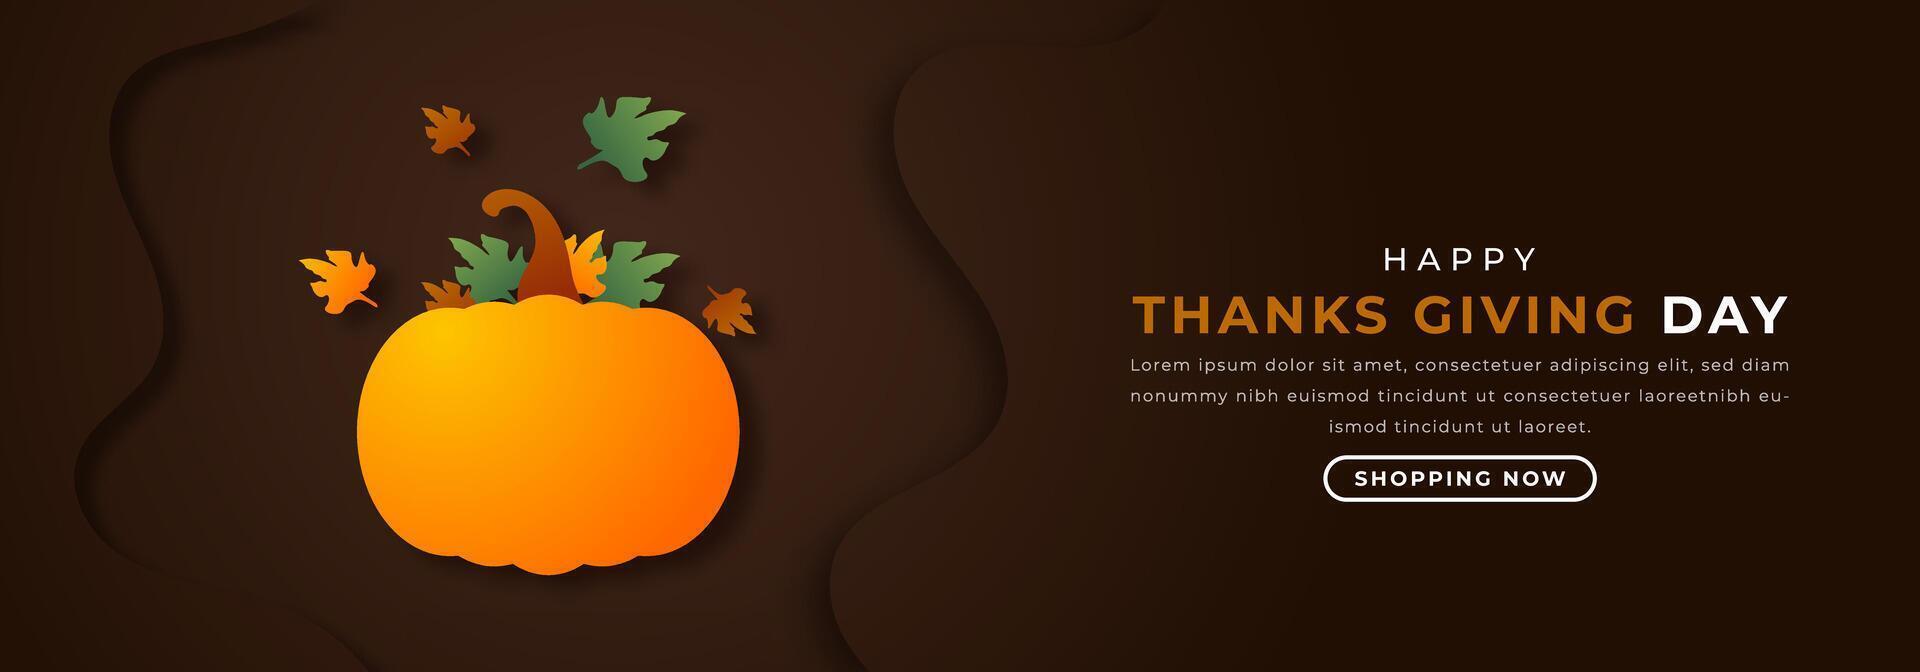 Happy Thanks Giving Day Paper cut style Vector Design Illustration for Background, Poster, Banner, Advertising, Greeting Card